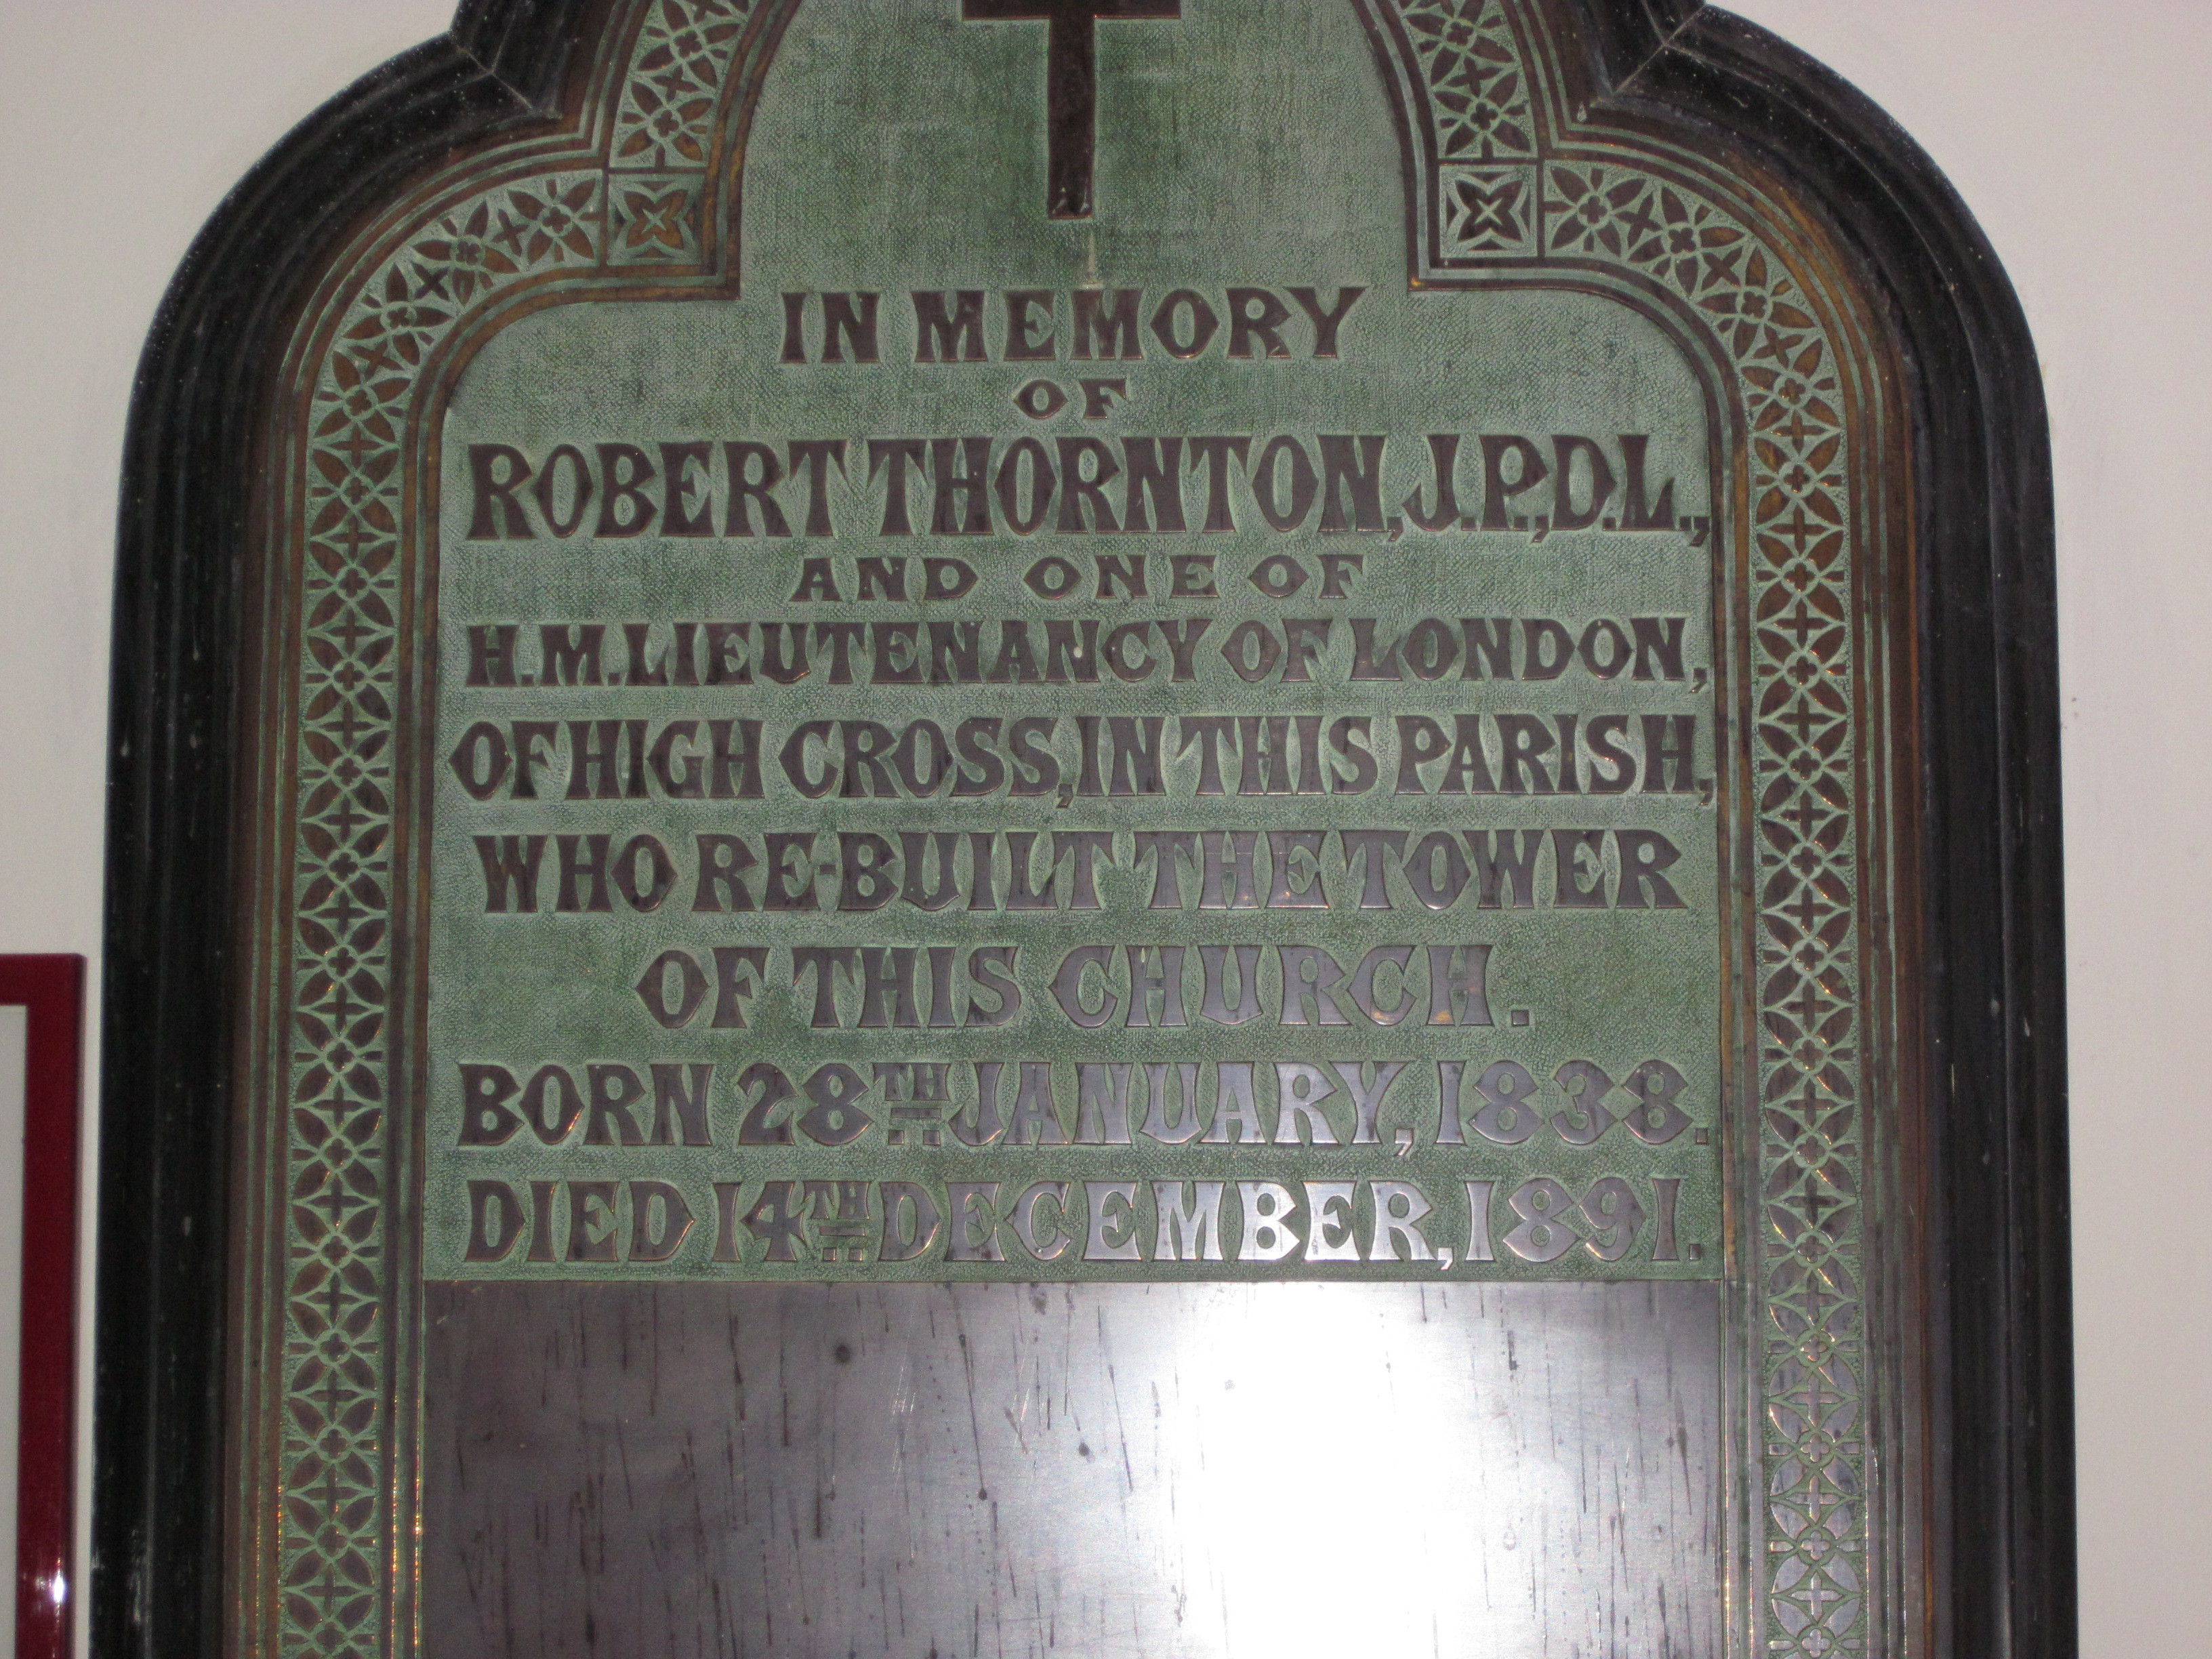 "In memory of Robert Thornton JP DL and one of H M Lieutenancy of London of High Cross in this parish who re-built the tower of this church. Born 28th January 1838. Died 14th December 1891."